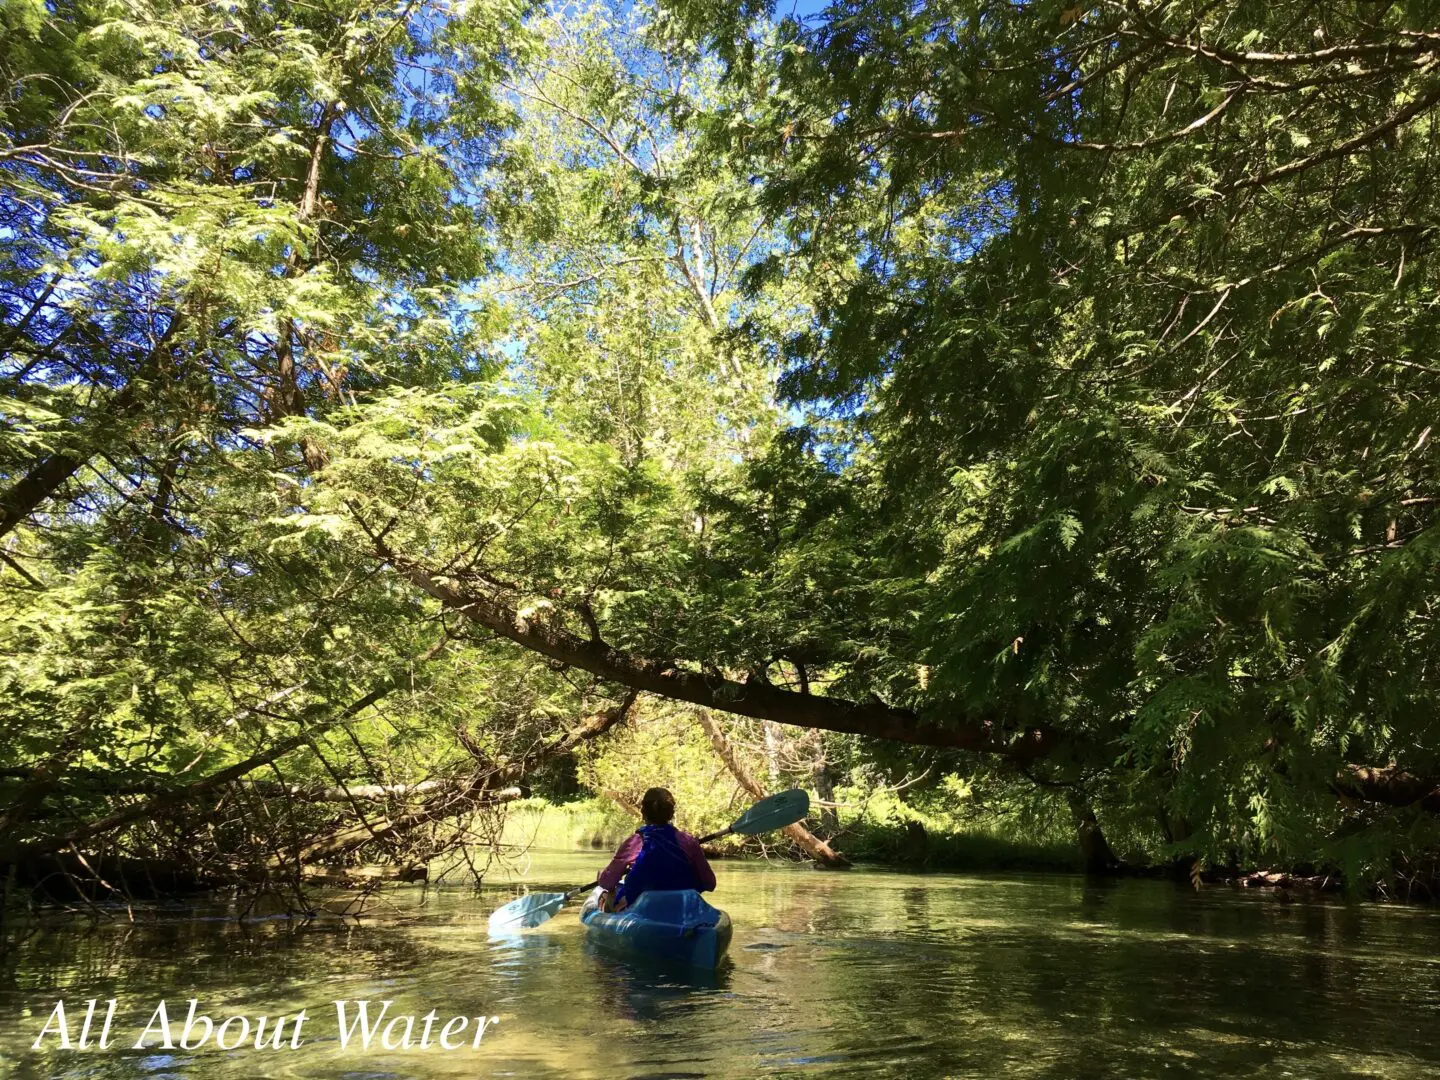 Person kayaking under a canopy of trees.